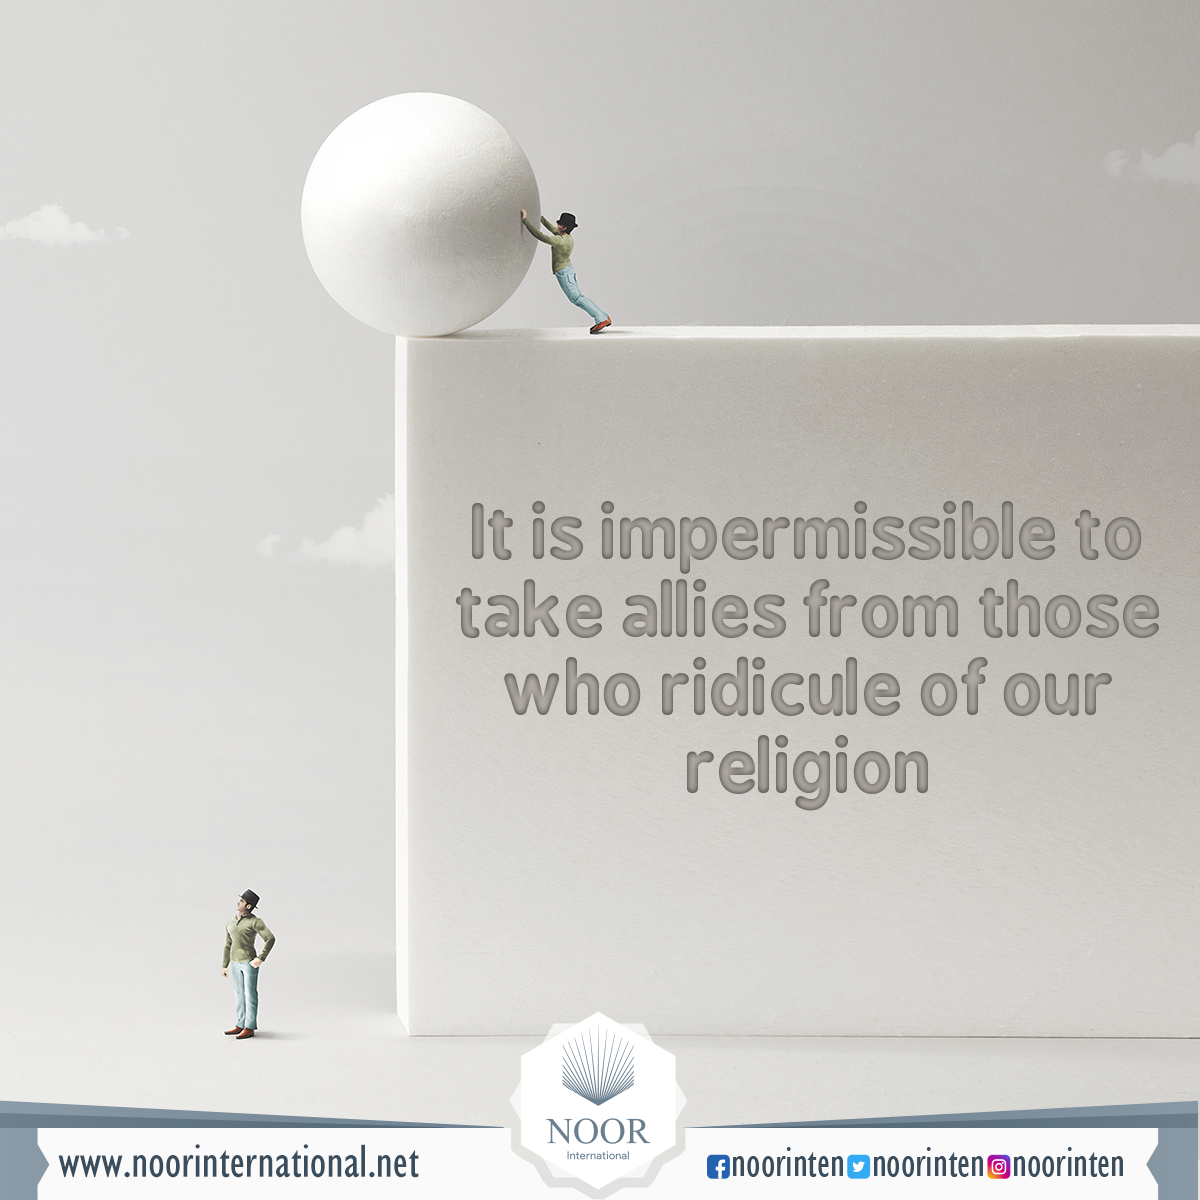 It is impermissible to take allies from those who ridicule of our religion.